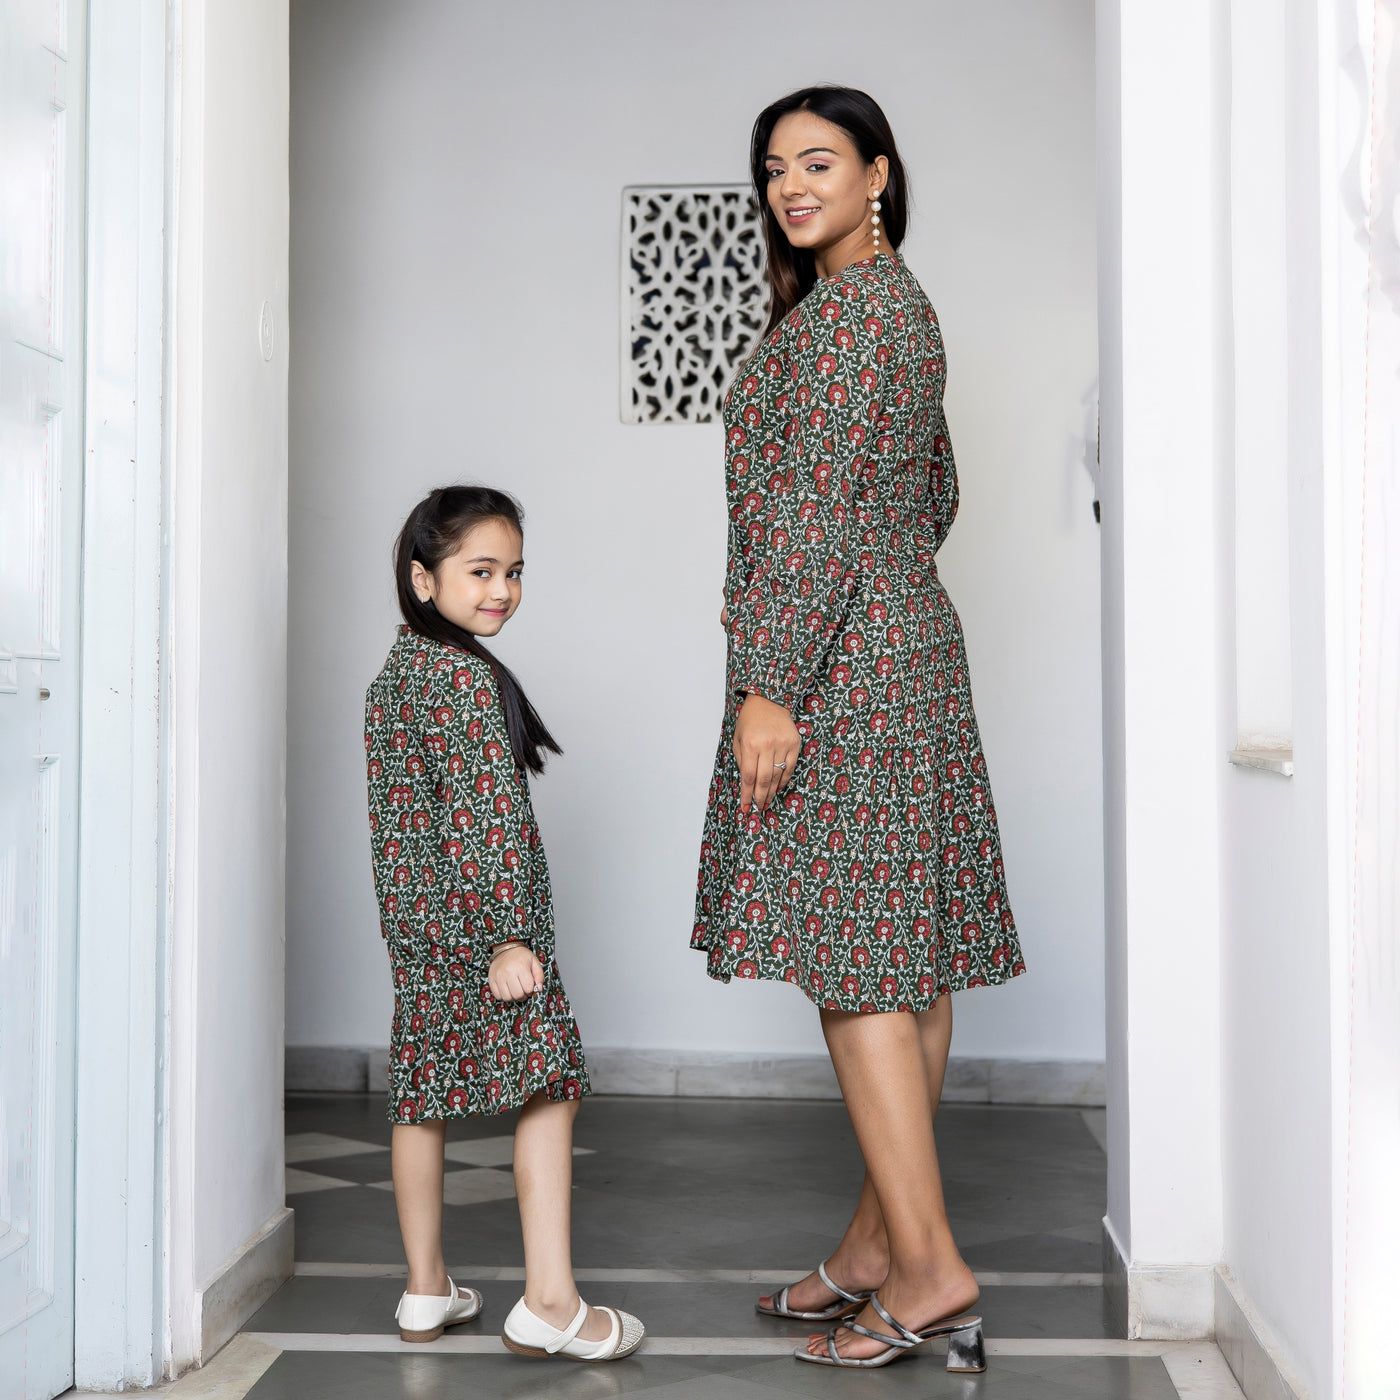 Dark Green Floral Print Button Down Mom and Daughter Dresses